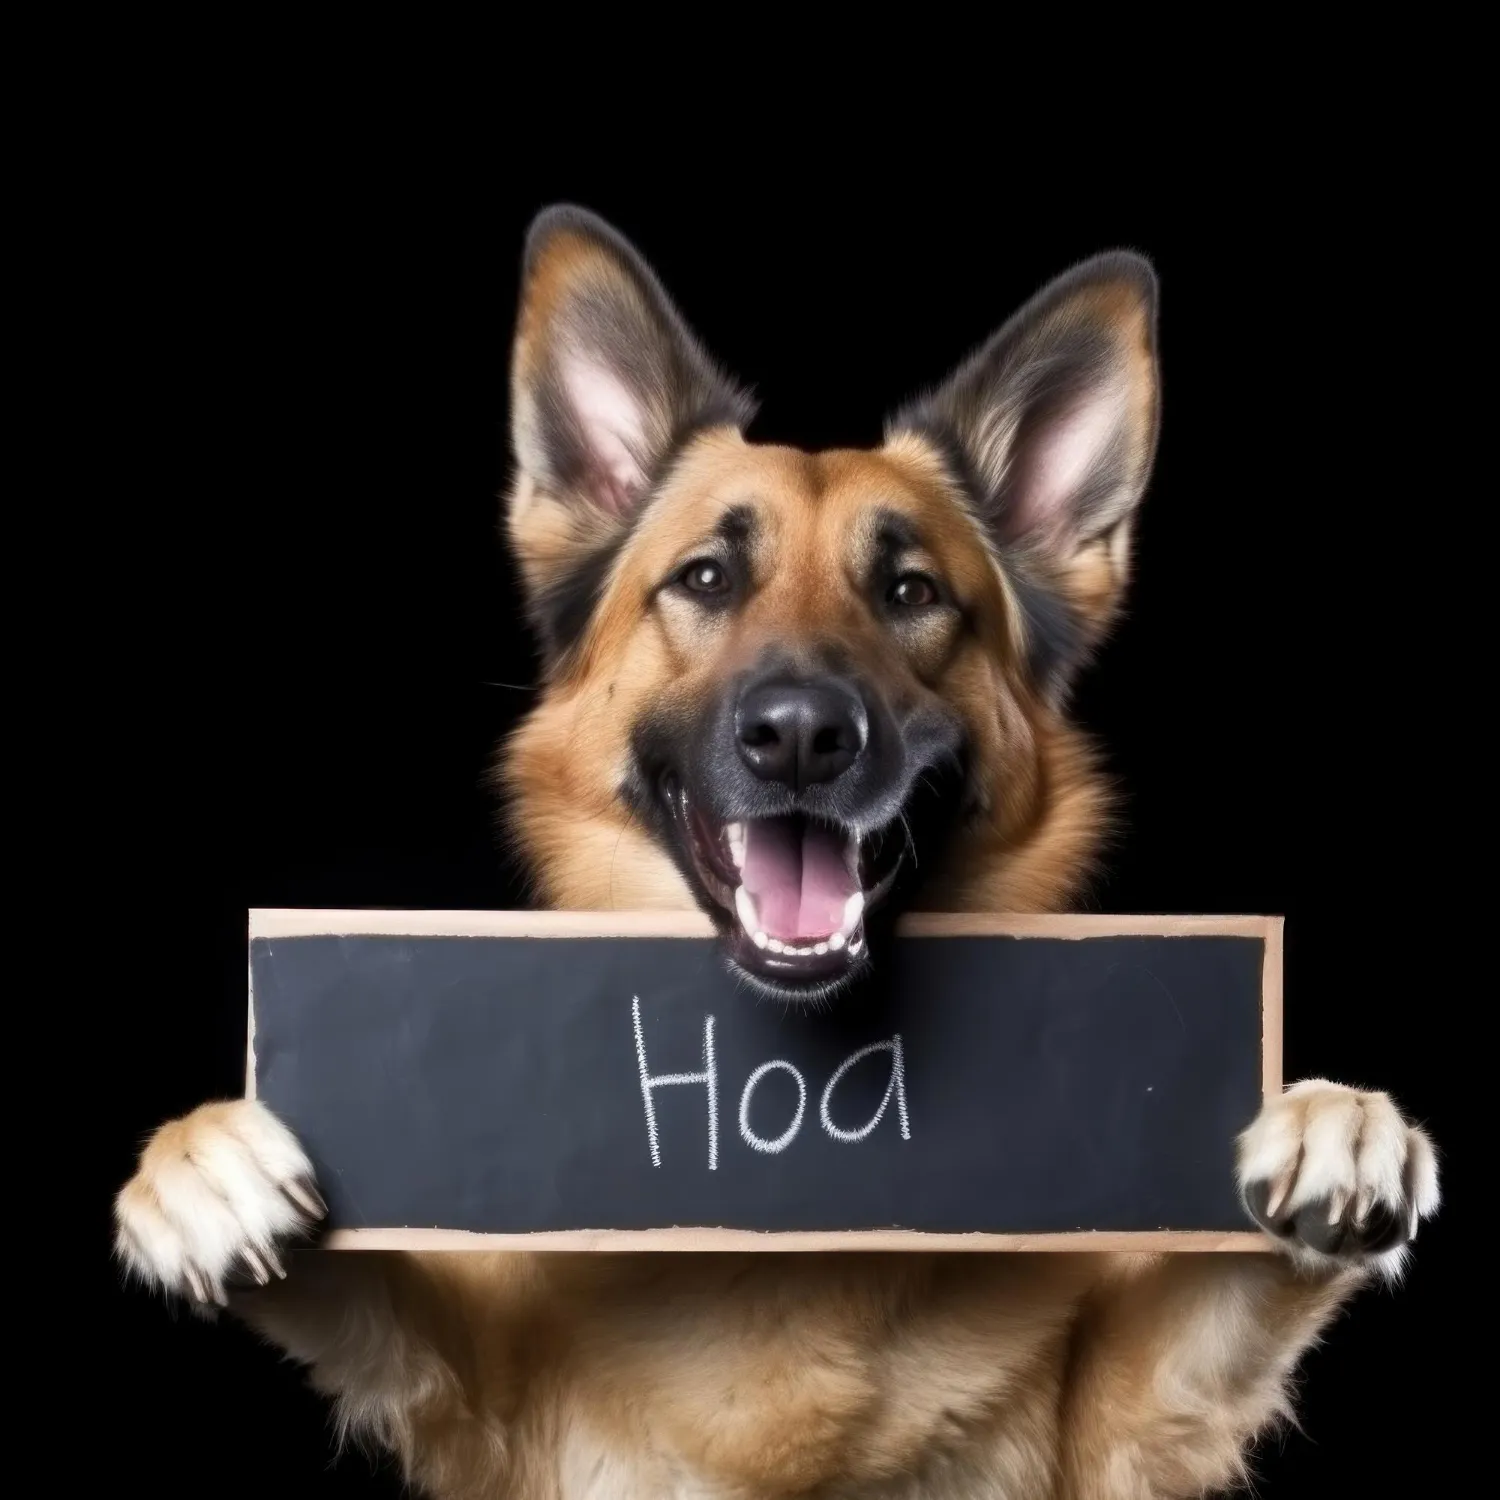 Dog Names That Start with H